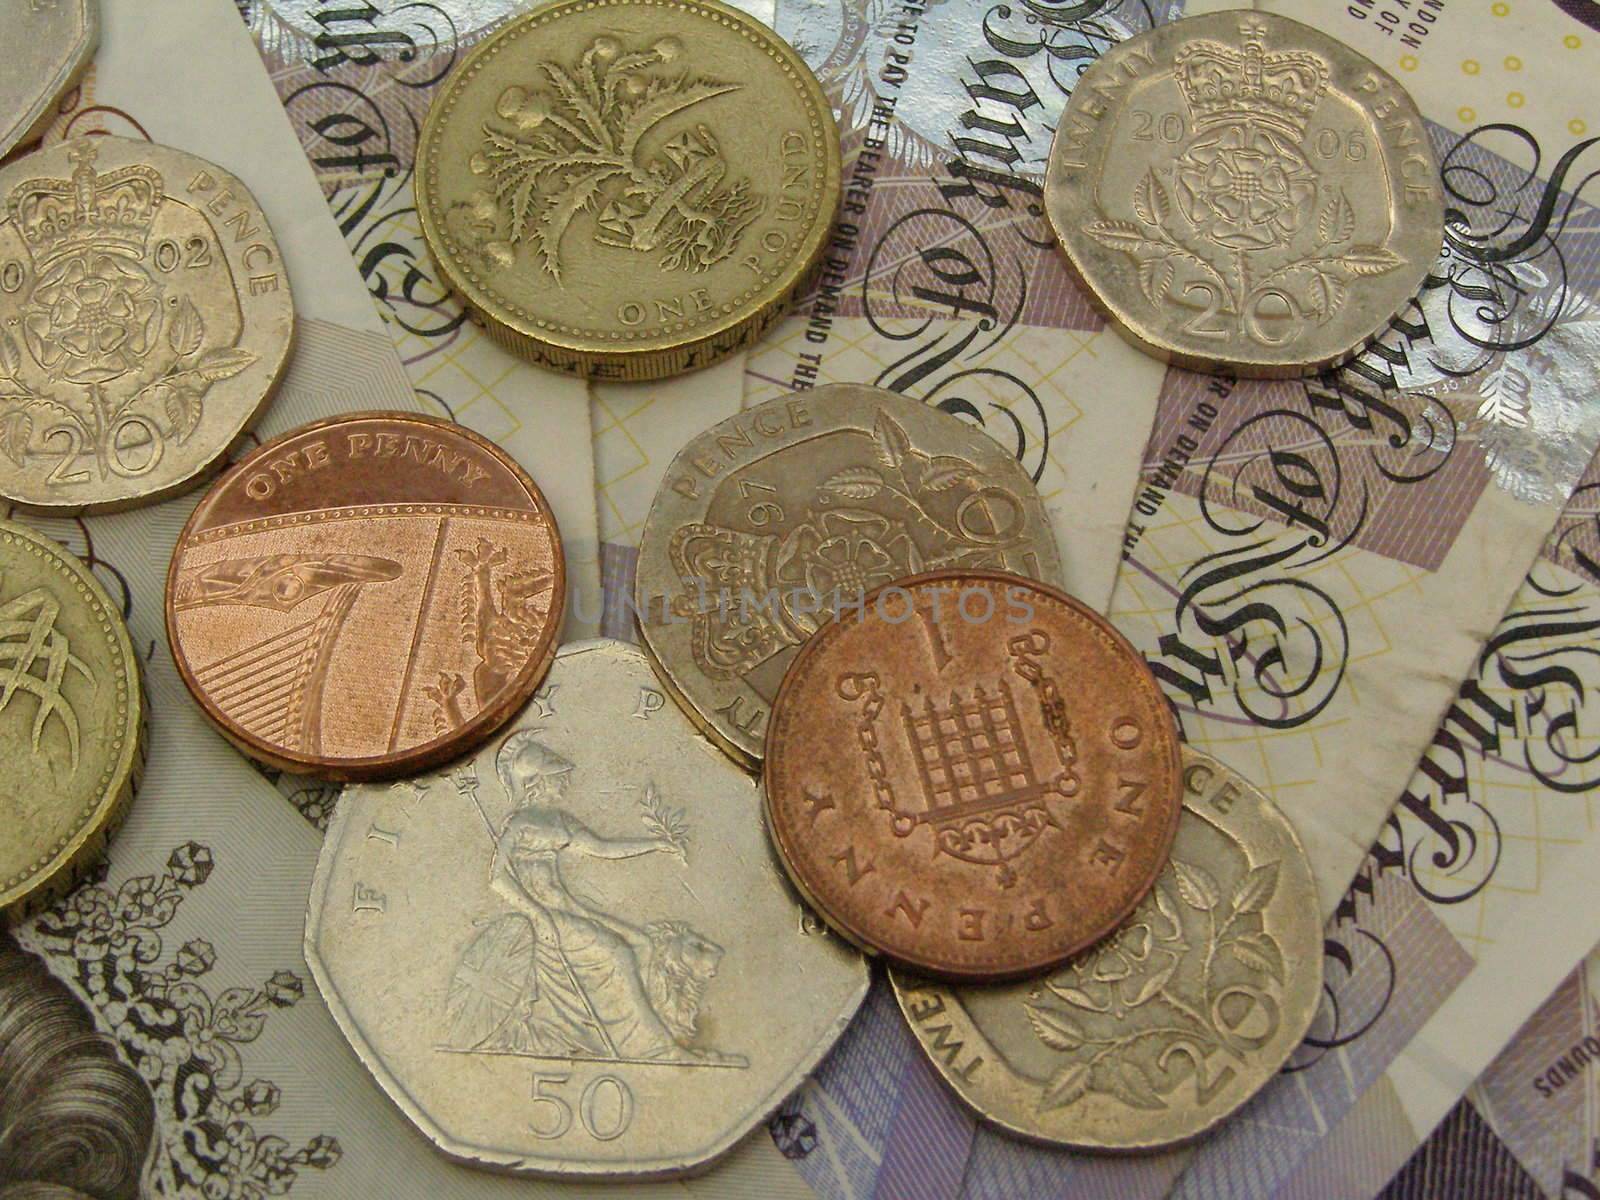 British Pound banknotes and coins